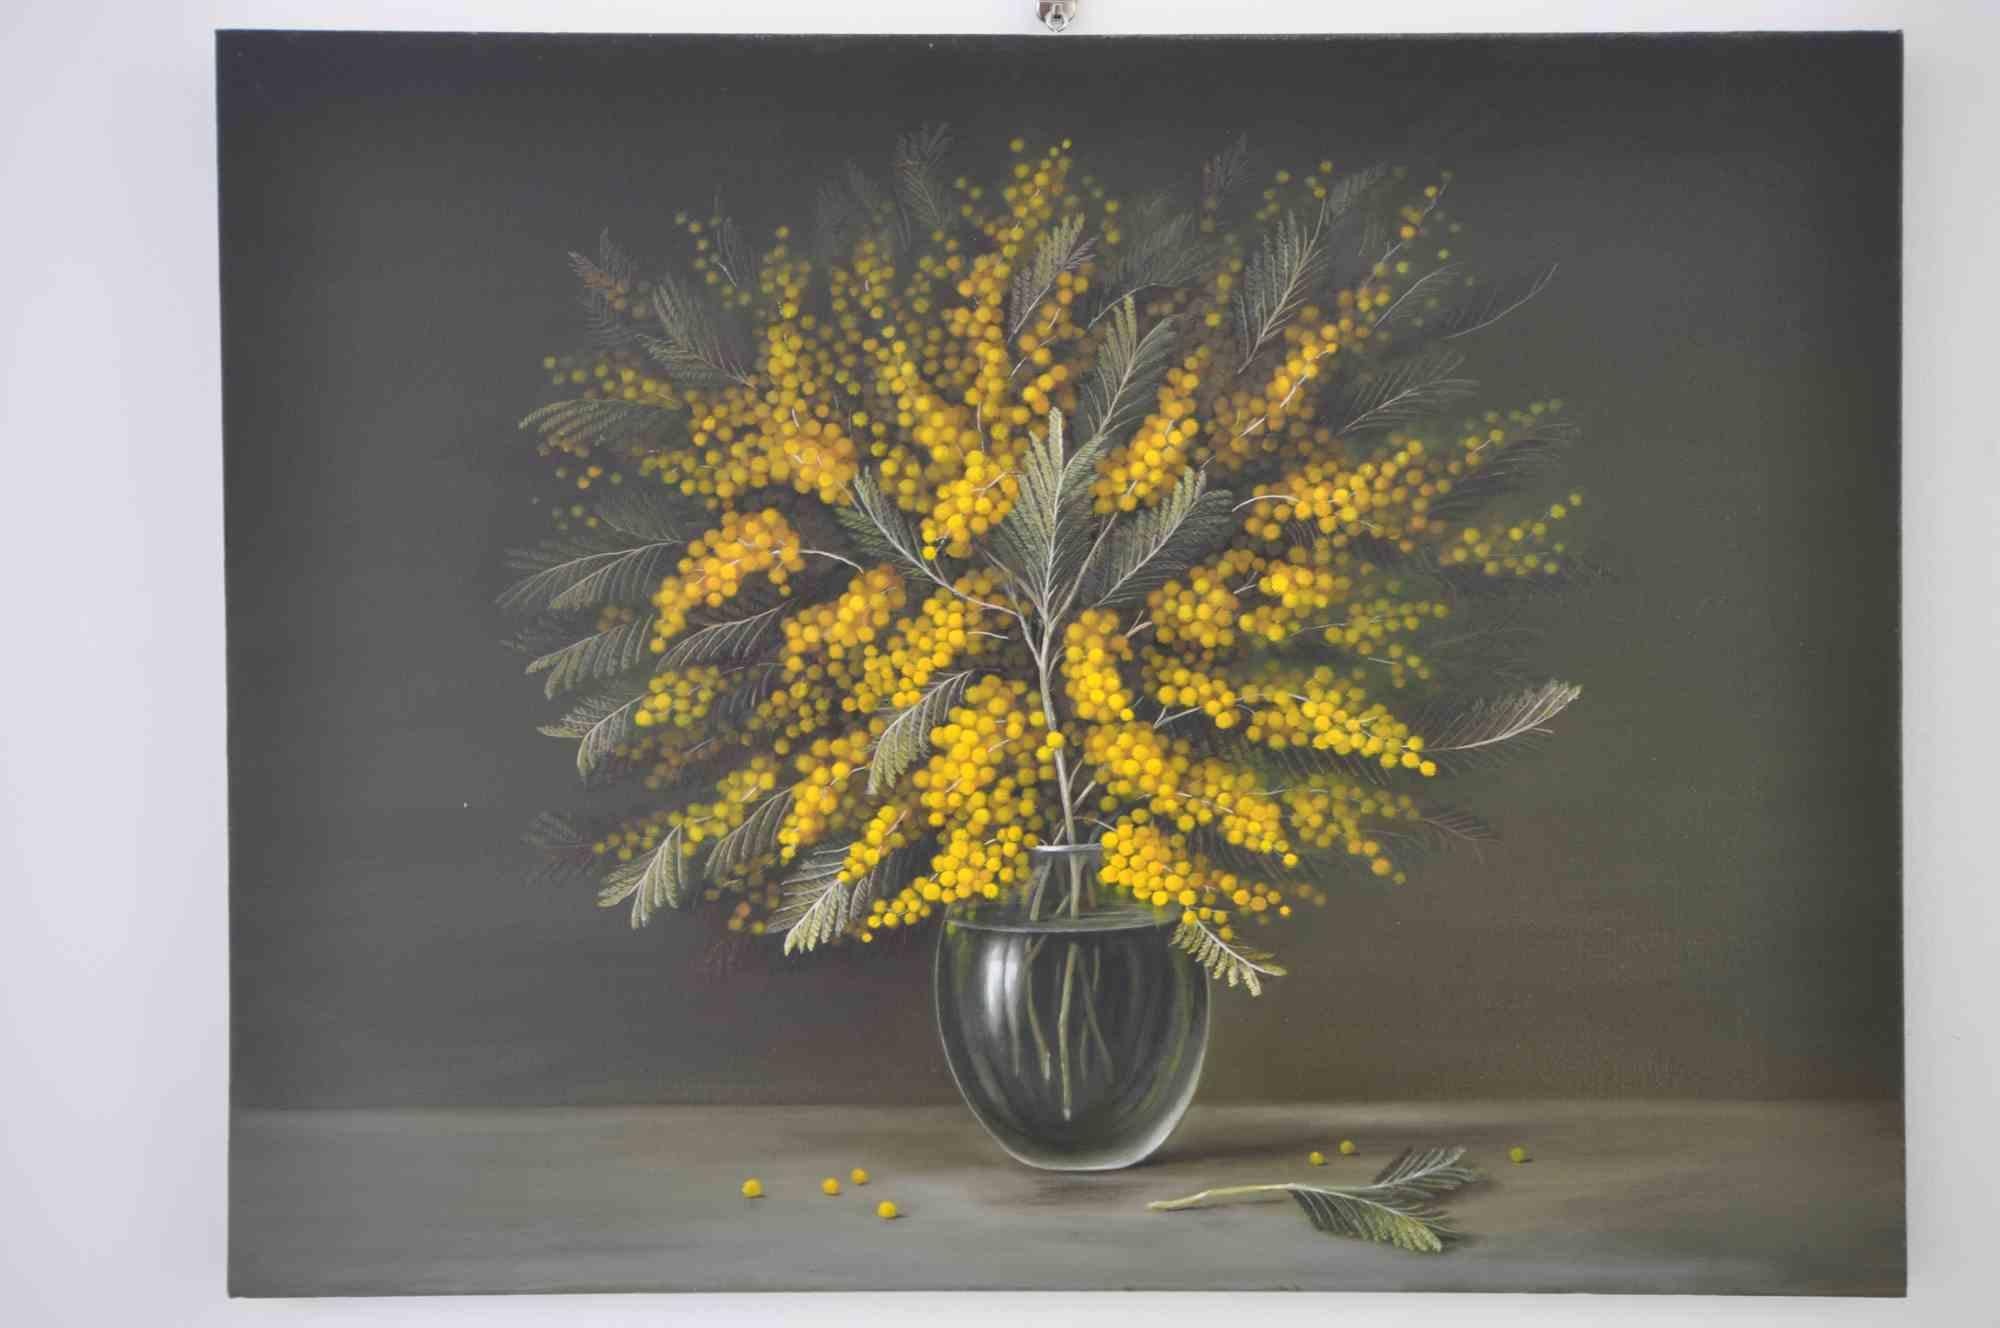 Mimosa 4 is an original artwork realized by the Italian artist Adriano Bernetti da Vila in 2018.

Hand-signed oil on canvas 60 x 80 cm. The artwork is a representation of a Mimosa bloomed in the month of February to announce the coming of